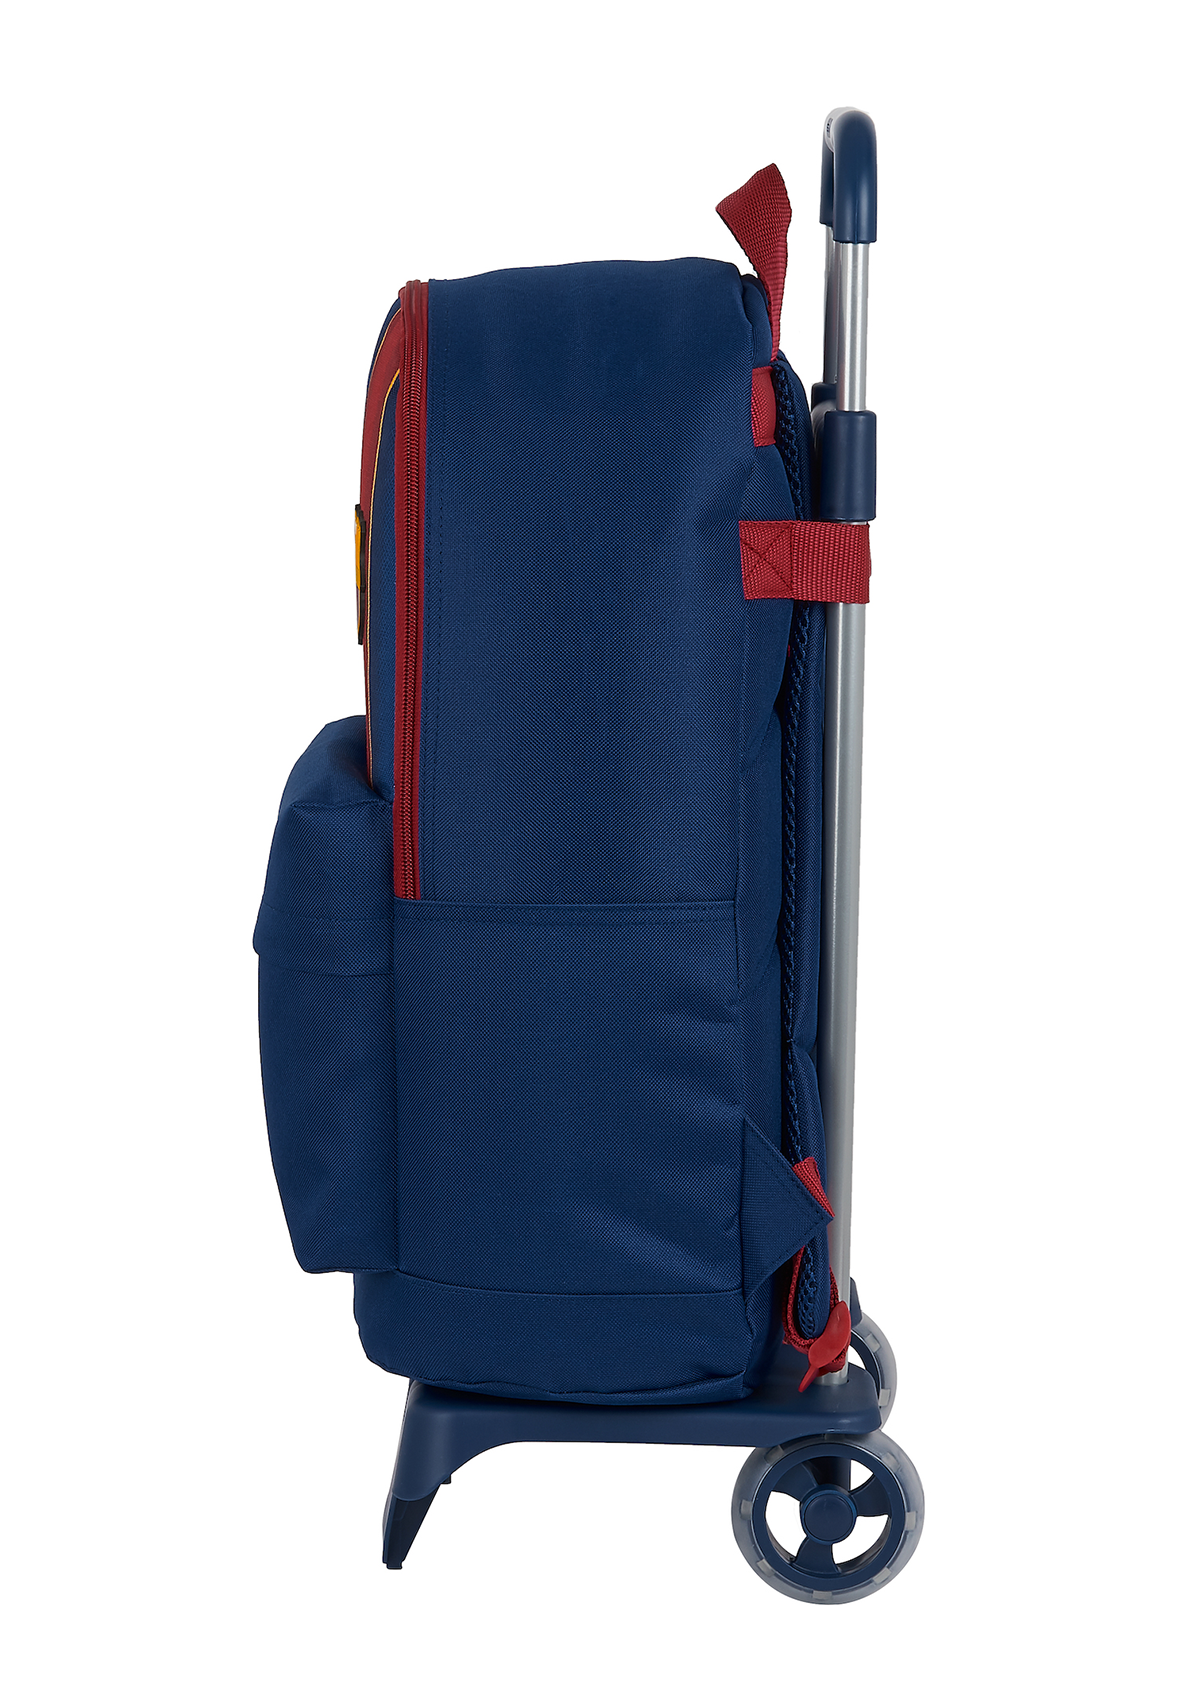 FC Barcelona Large Backpack with Trolley